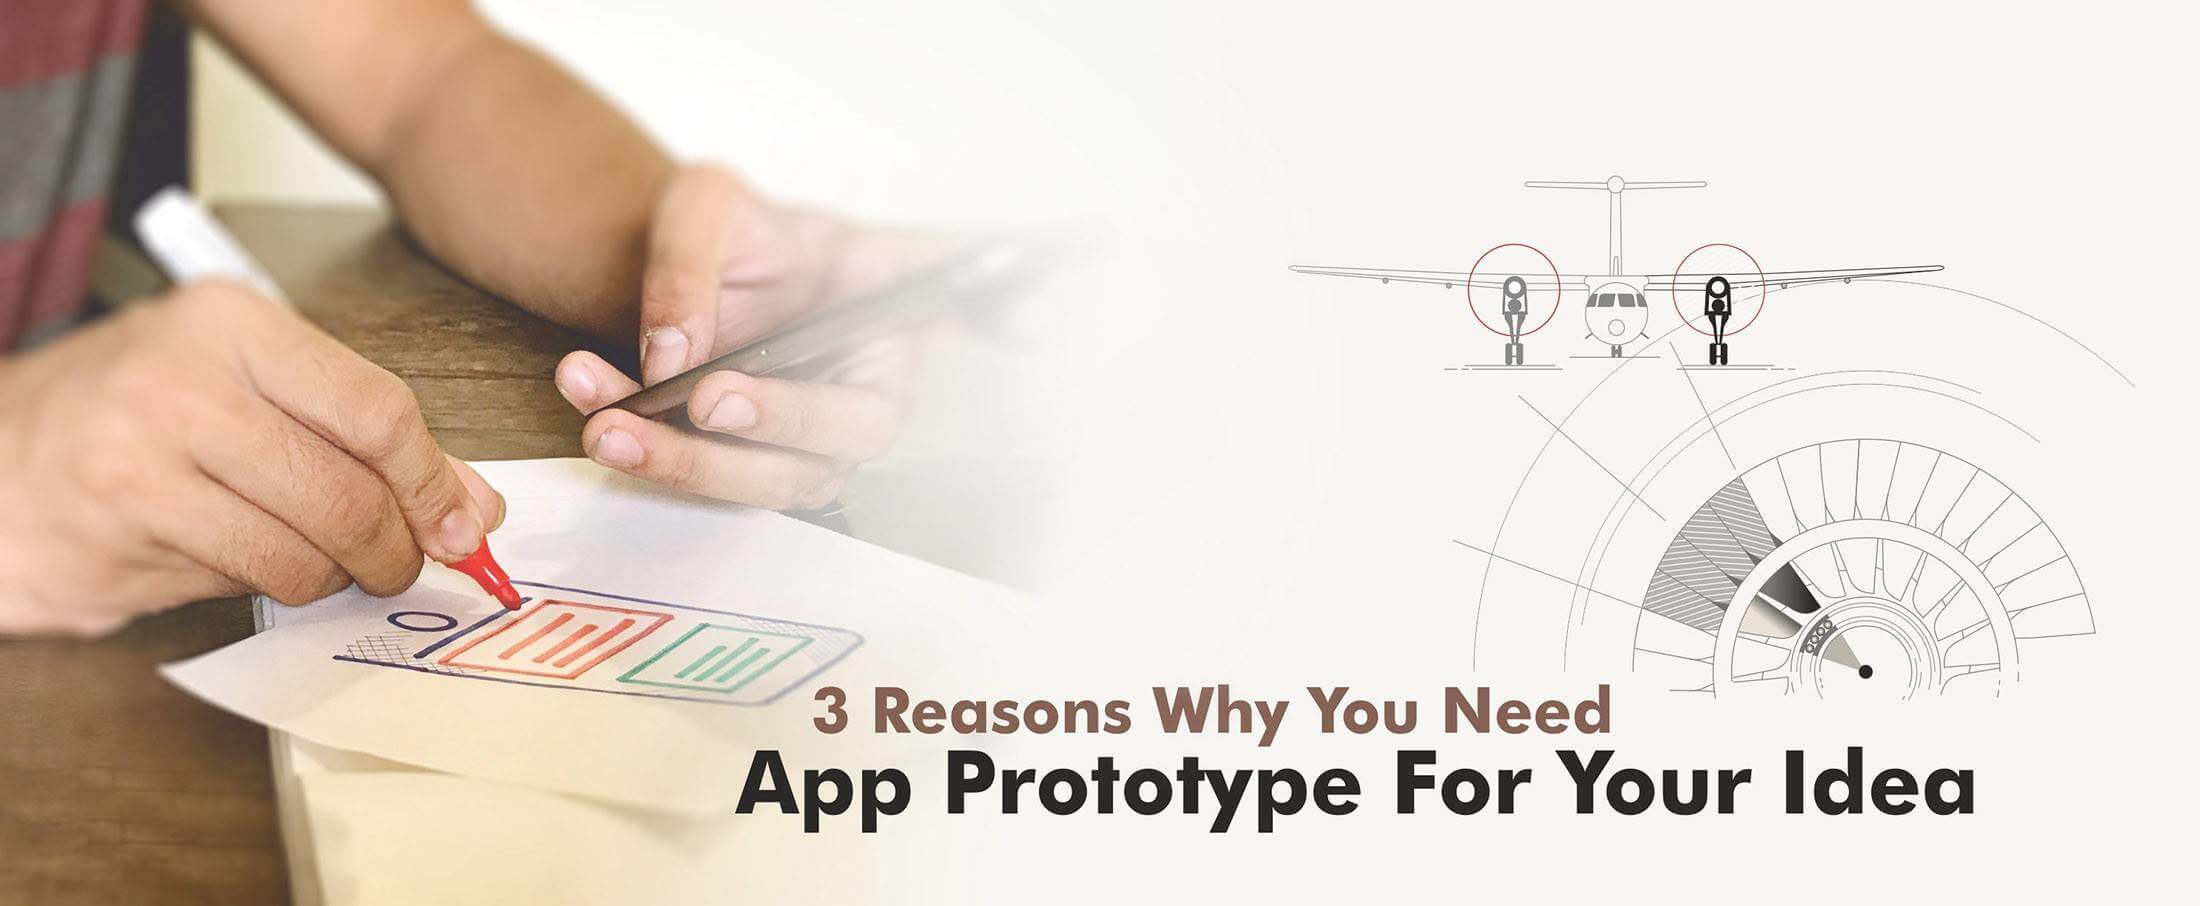 3 Reasons Why You Need App Prototype For Your Idea